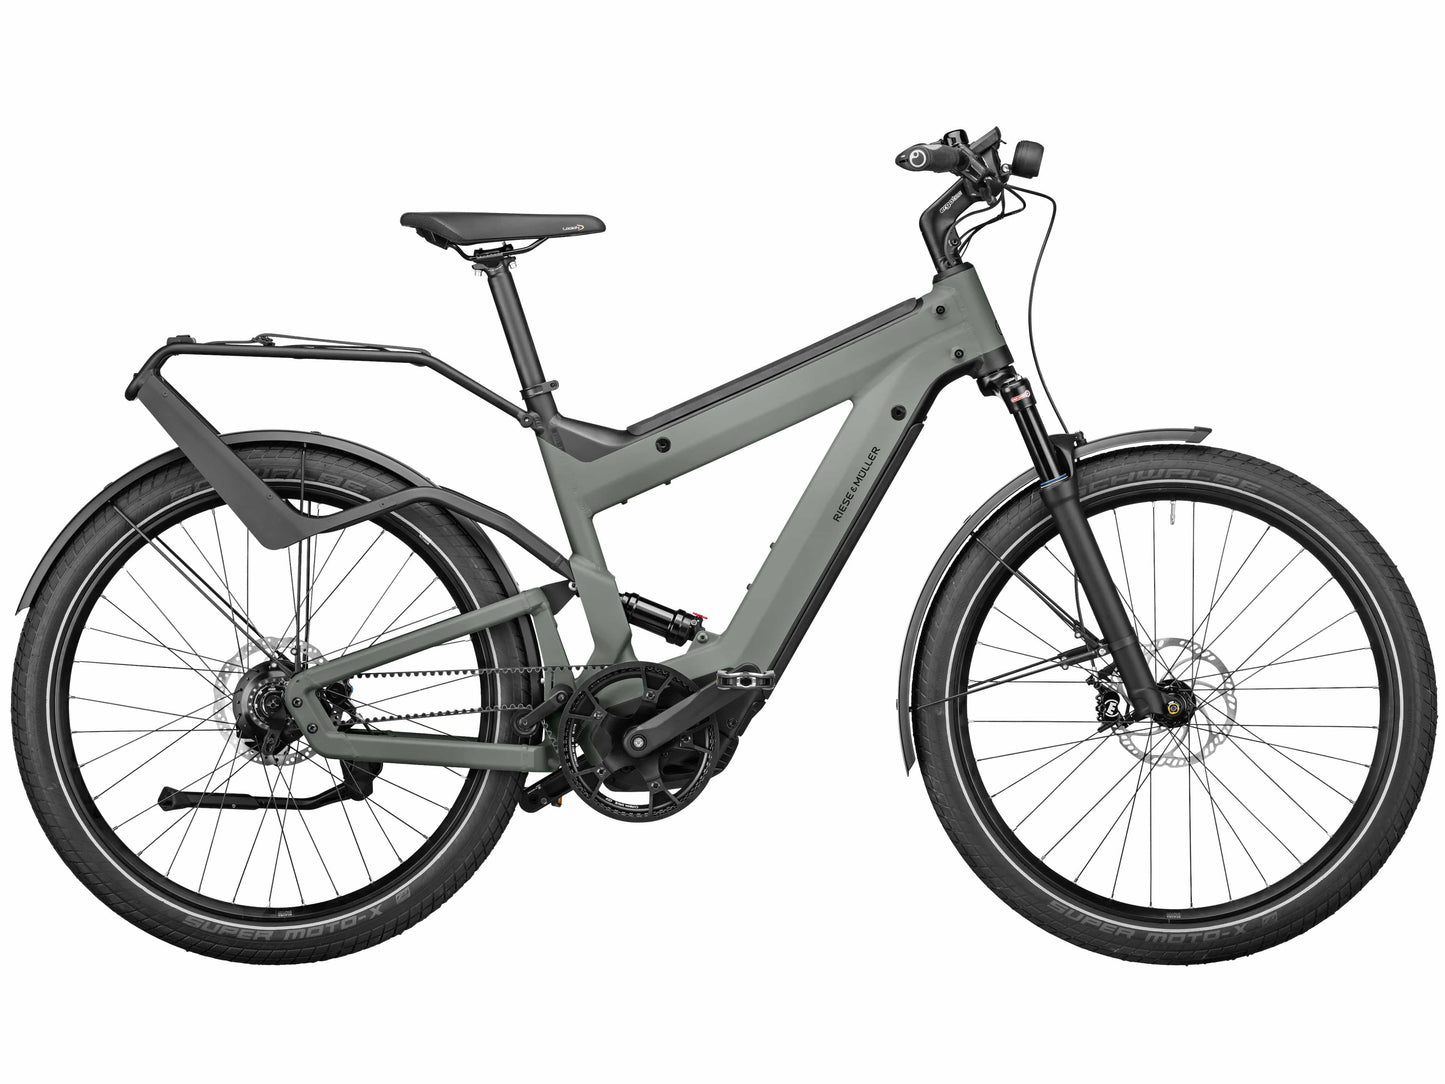 Riese_and_Muller_Superdelite_GT_Rohloff_HS_emtb_full_suspension_tundra_grey_side_view_on_Fly_Rides